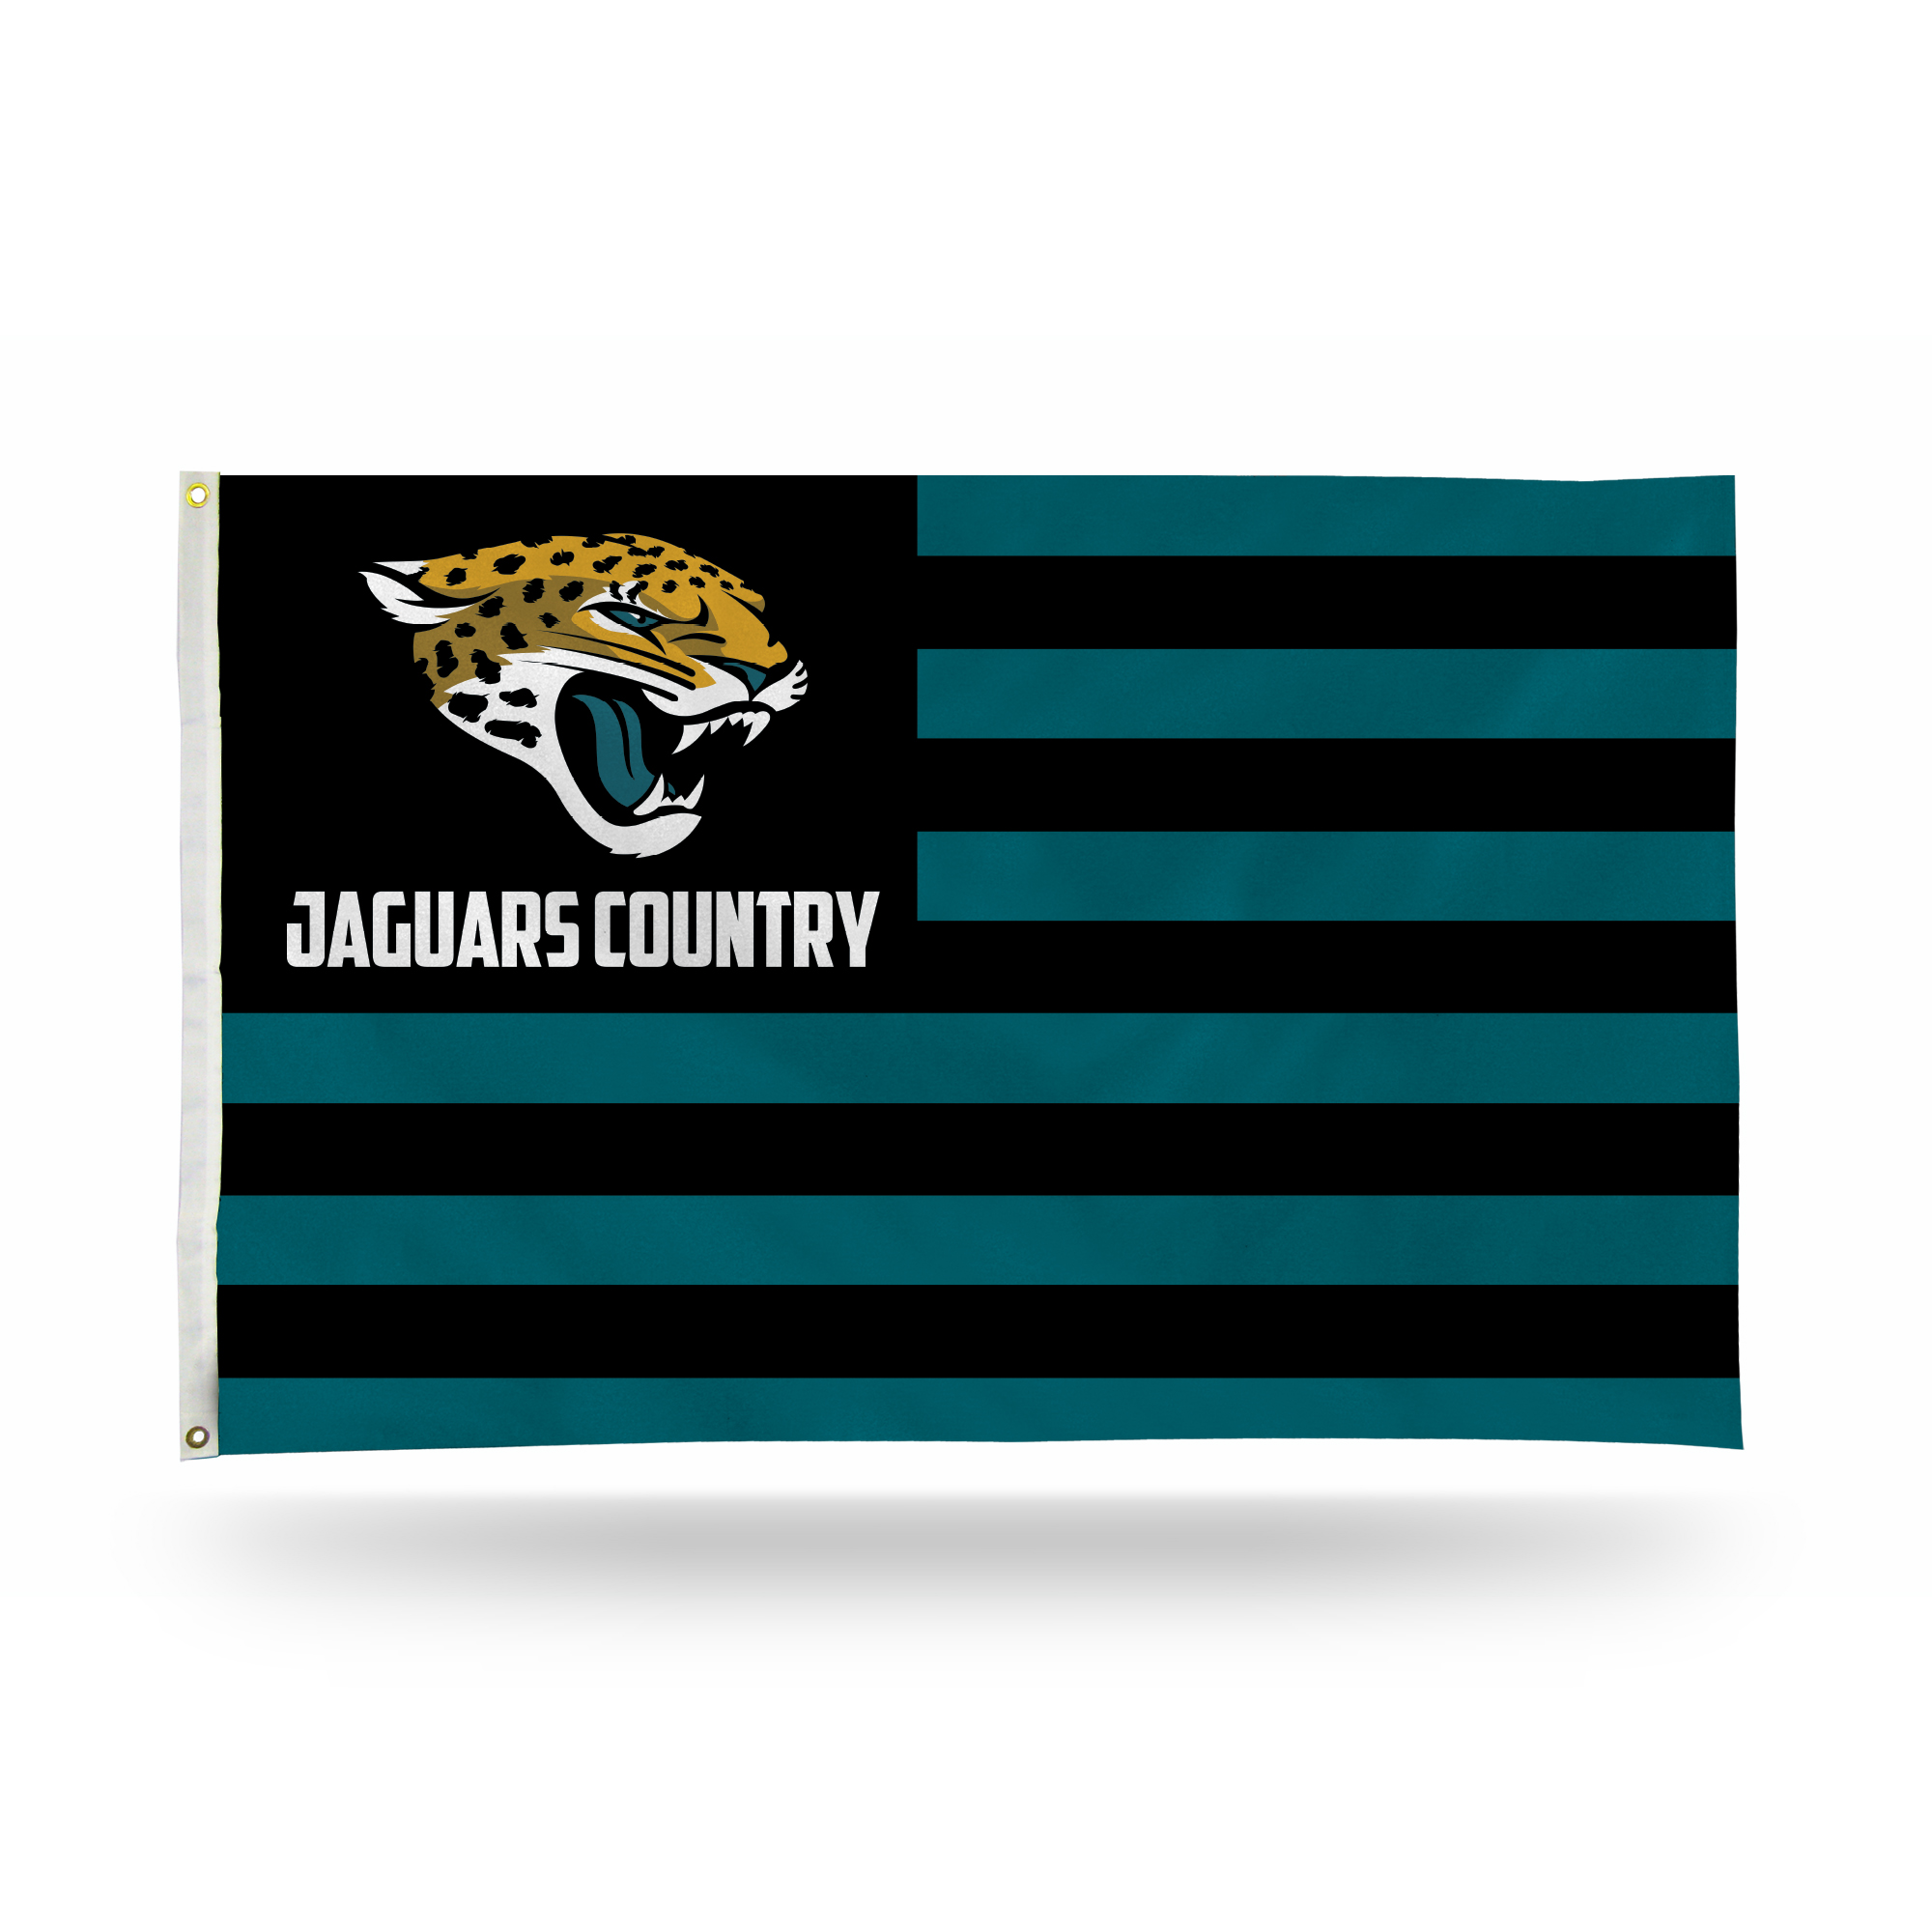 Rico Industries NFL Football Jacksonville Jaguars Country 3' x 5' Banner Flag